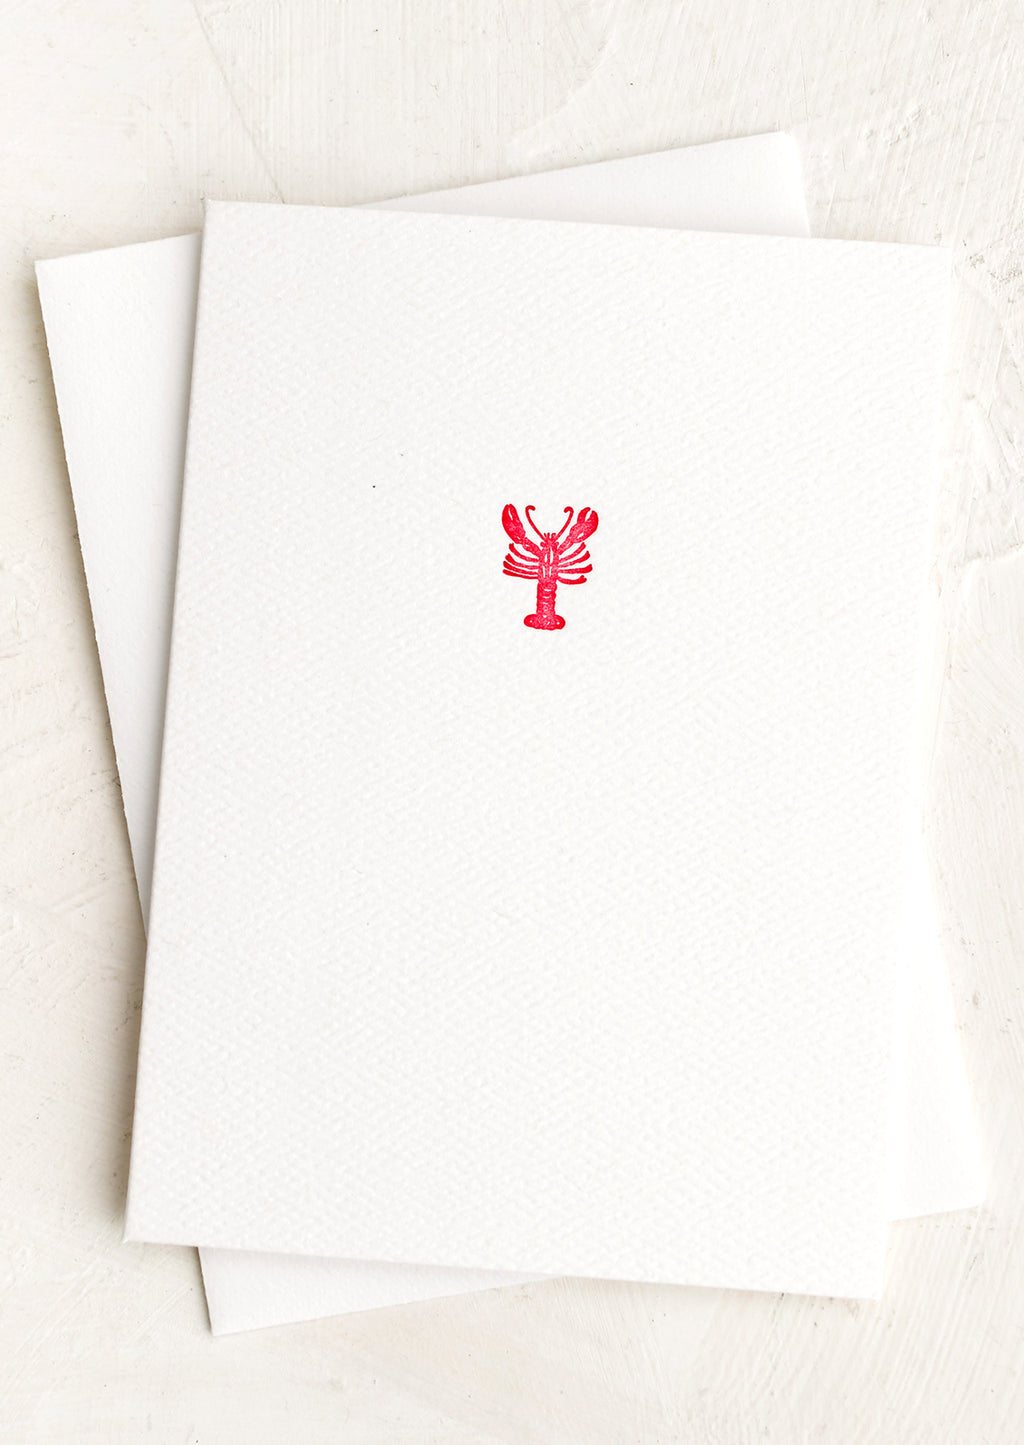 Lobster: A plain white card with small red lobster at front.